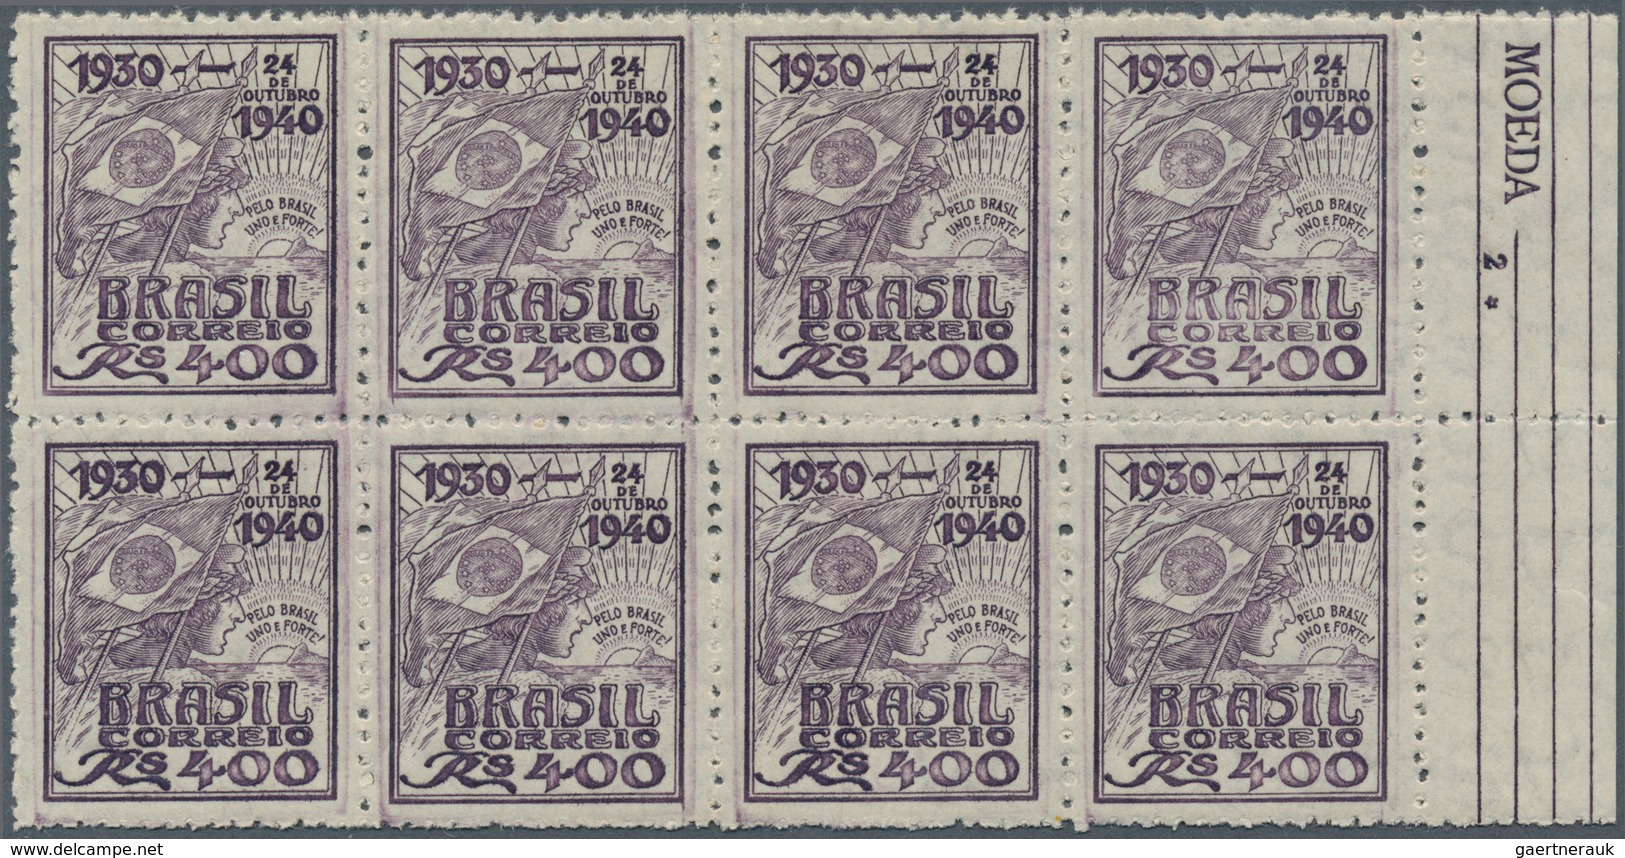 Brasilien: 1940, 10 Years Government Of Getulio Vargas 400r. Dark Lilac Showing Flag Of Brazil With - Neufs